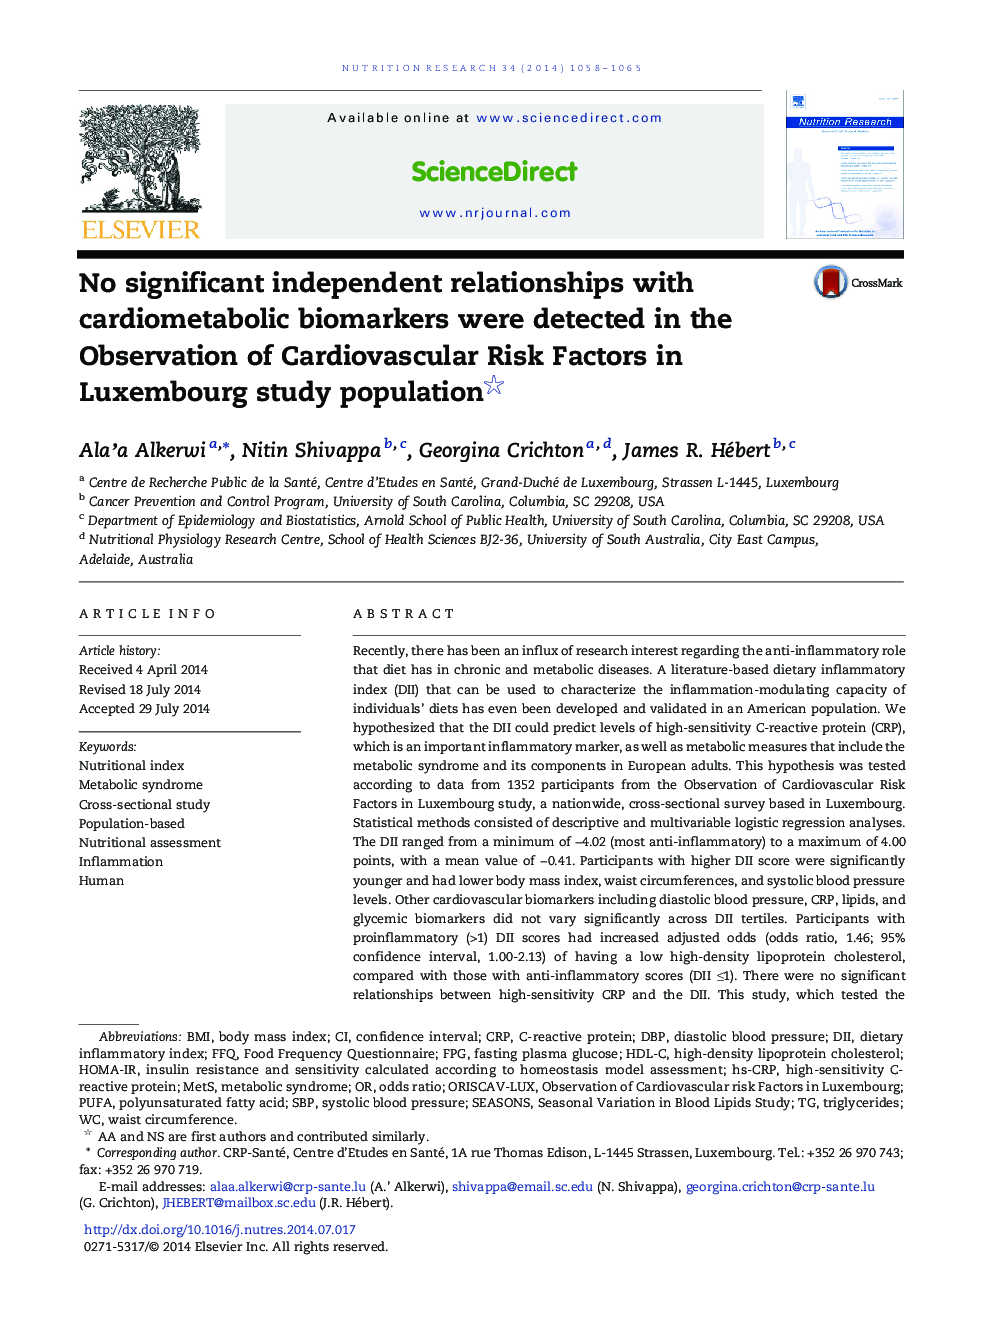 No significant independent relationships with cardiometabolic biomarkers were detected in the Observation of Cardiovascular Risk Factors in Luxembourg study population 